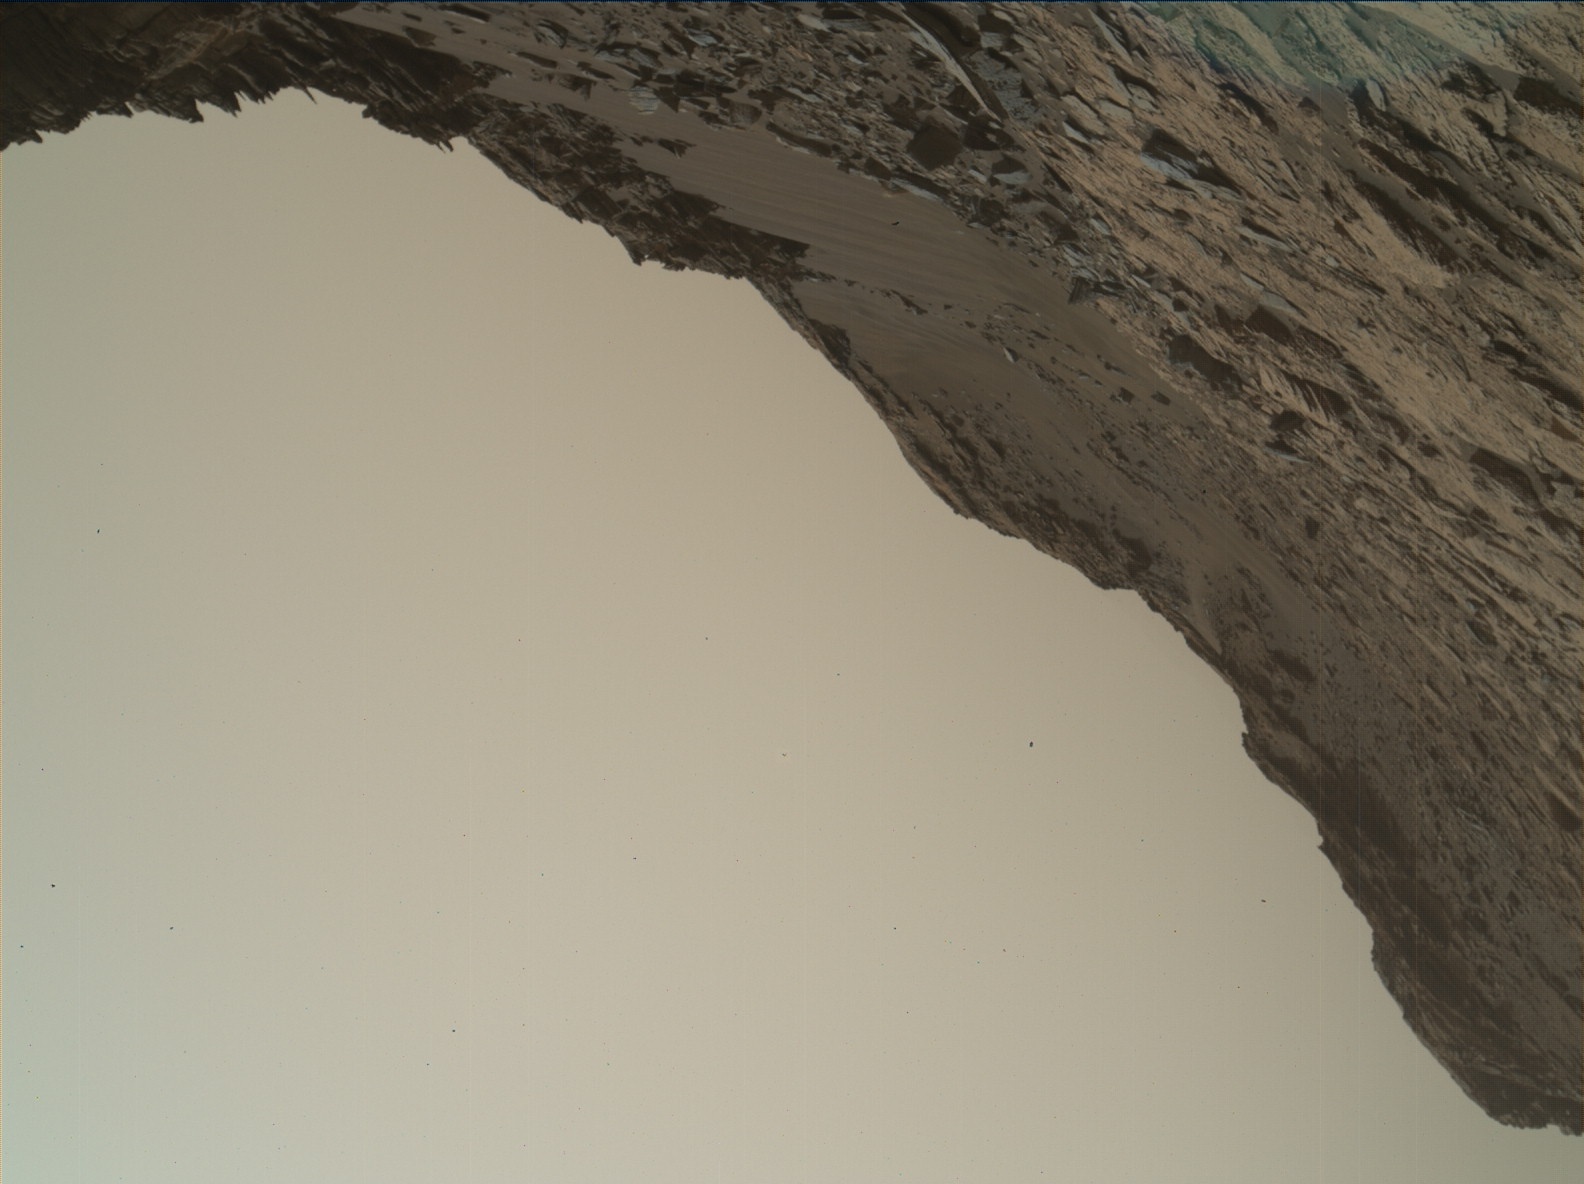 Nasa's Mars rover Curiosity acquired this image using its Mars Hand Lens Imager (MAHLI) on Sol 1463